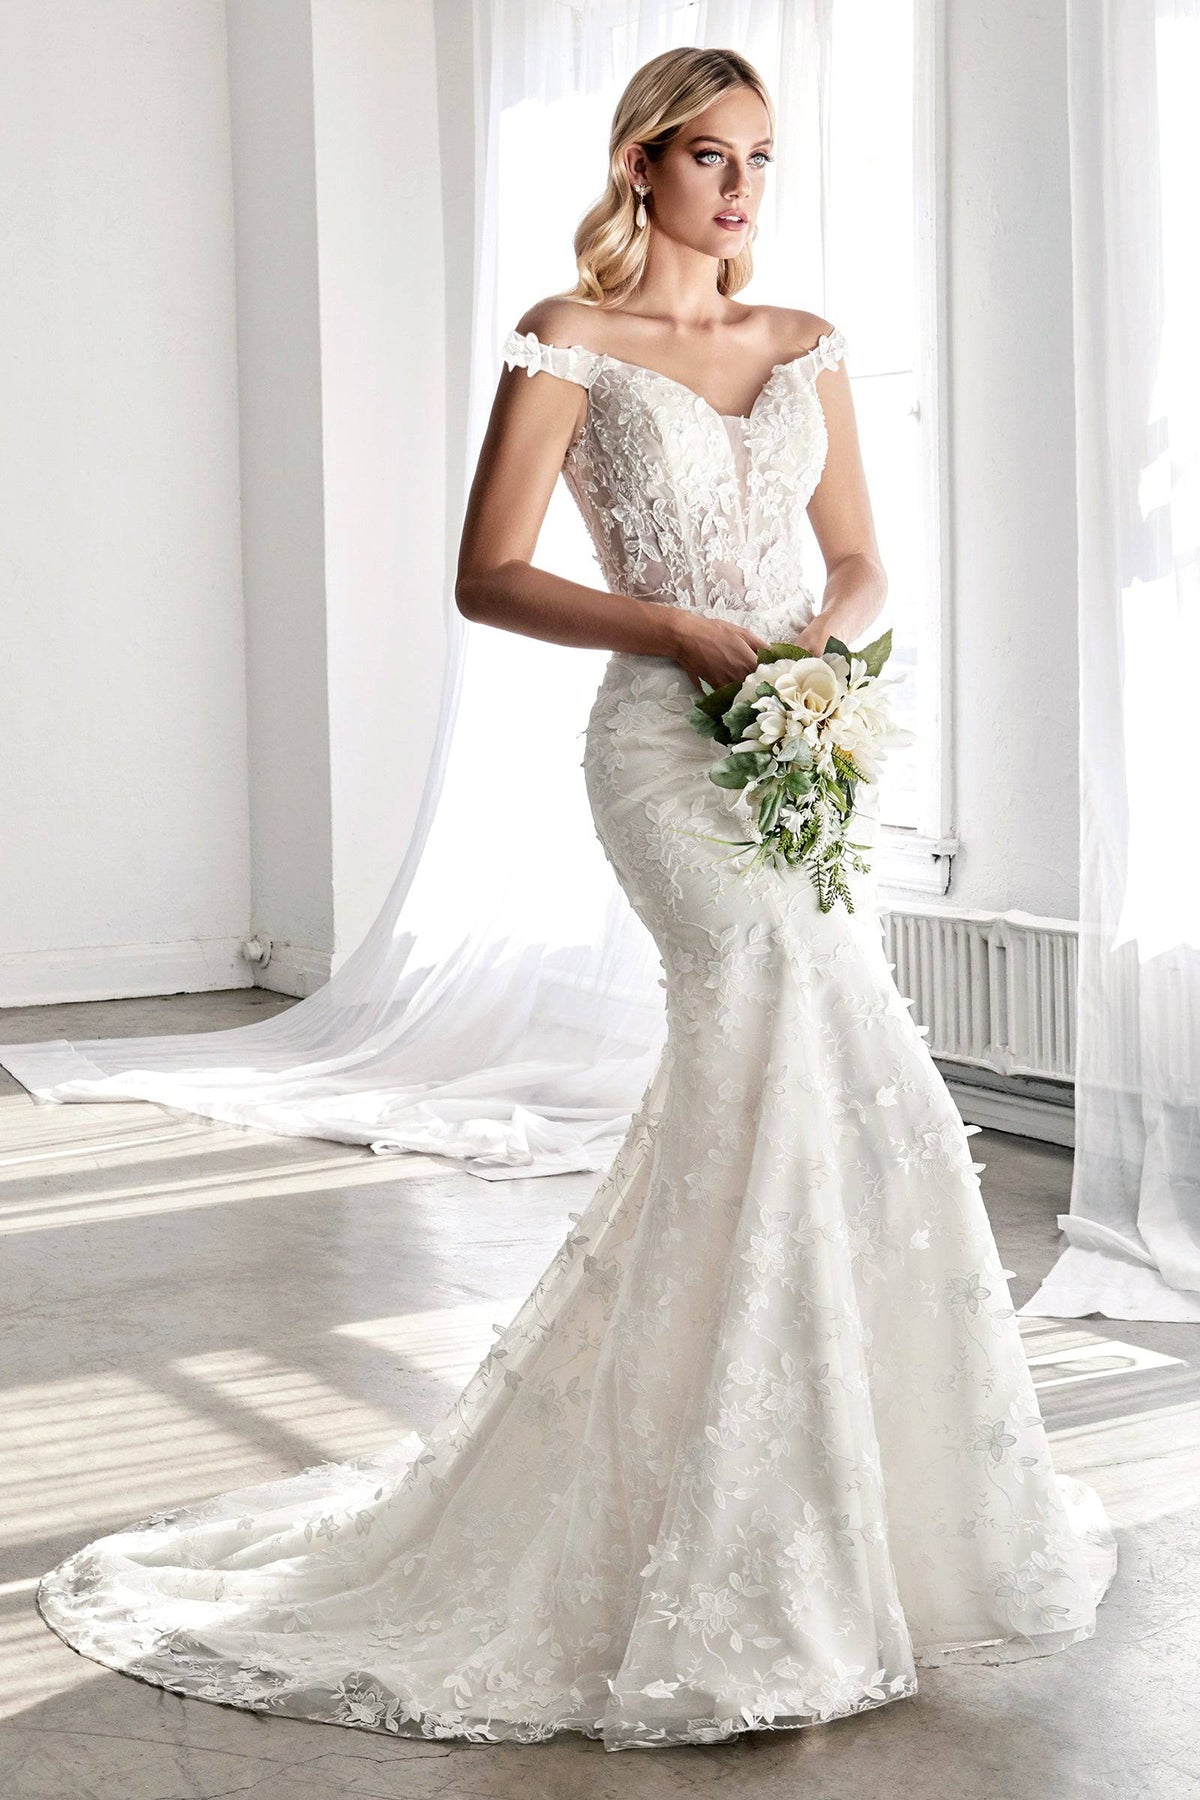 Stunning Wedding Gown with Deep Neckline and Floral Accents #CDTY01 - NORMA REED